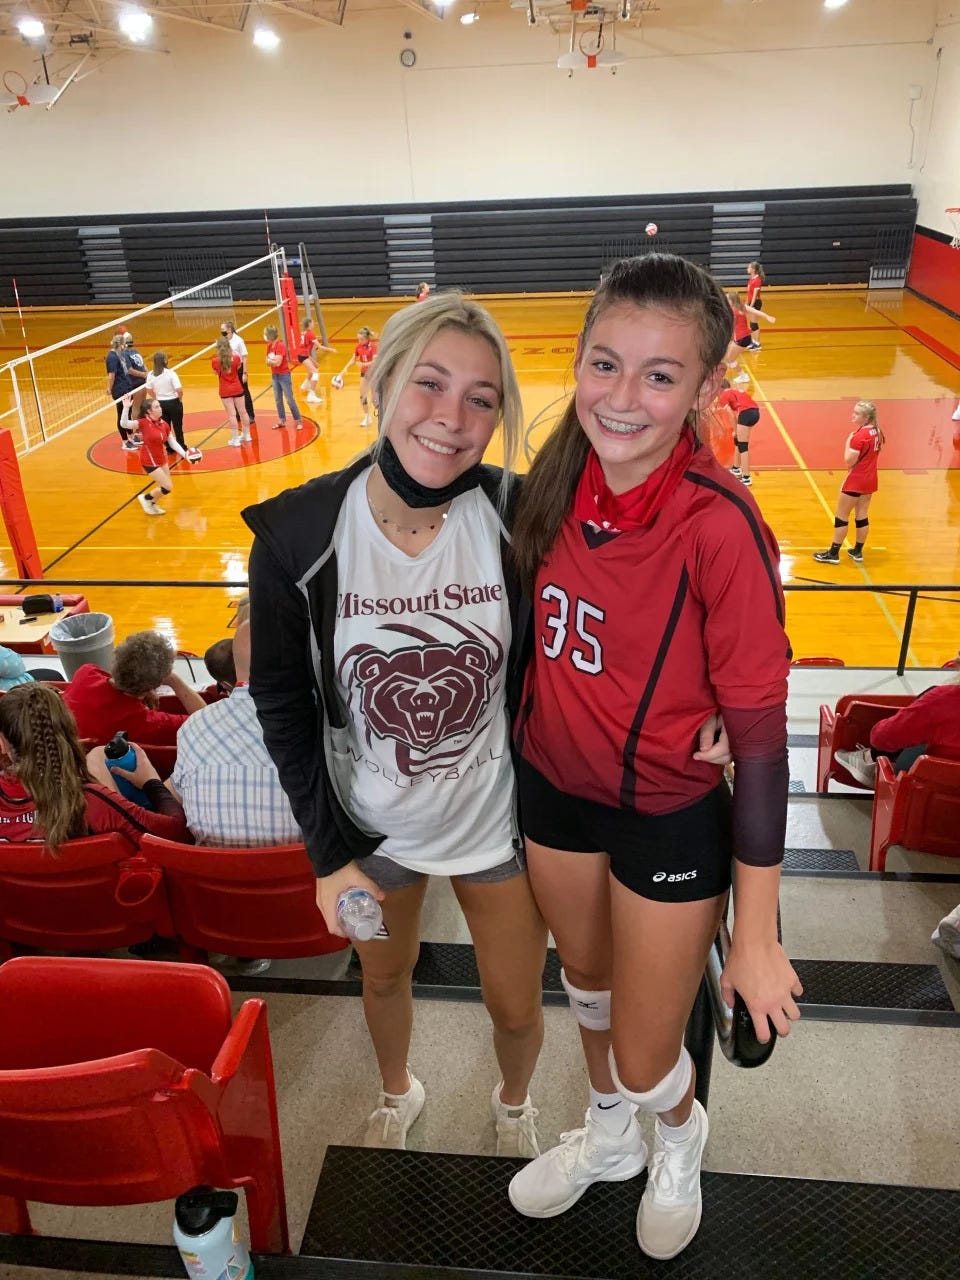 Former Nixa volleyball player Jaycee Fixsen (left), who is currently battling Hodgkin's lymphoma, as a student-athlete at Missouri State is pictured with Ozark volleyball player Josie Orellana who recently passed away after battling acute myeloid leukemia.